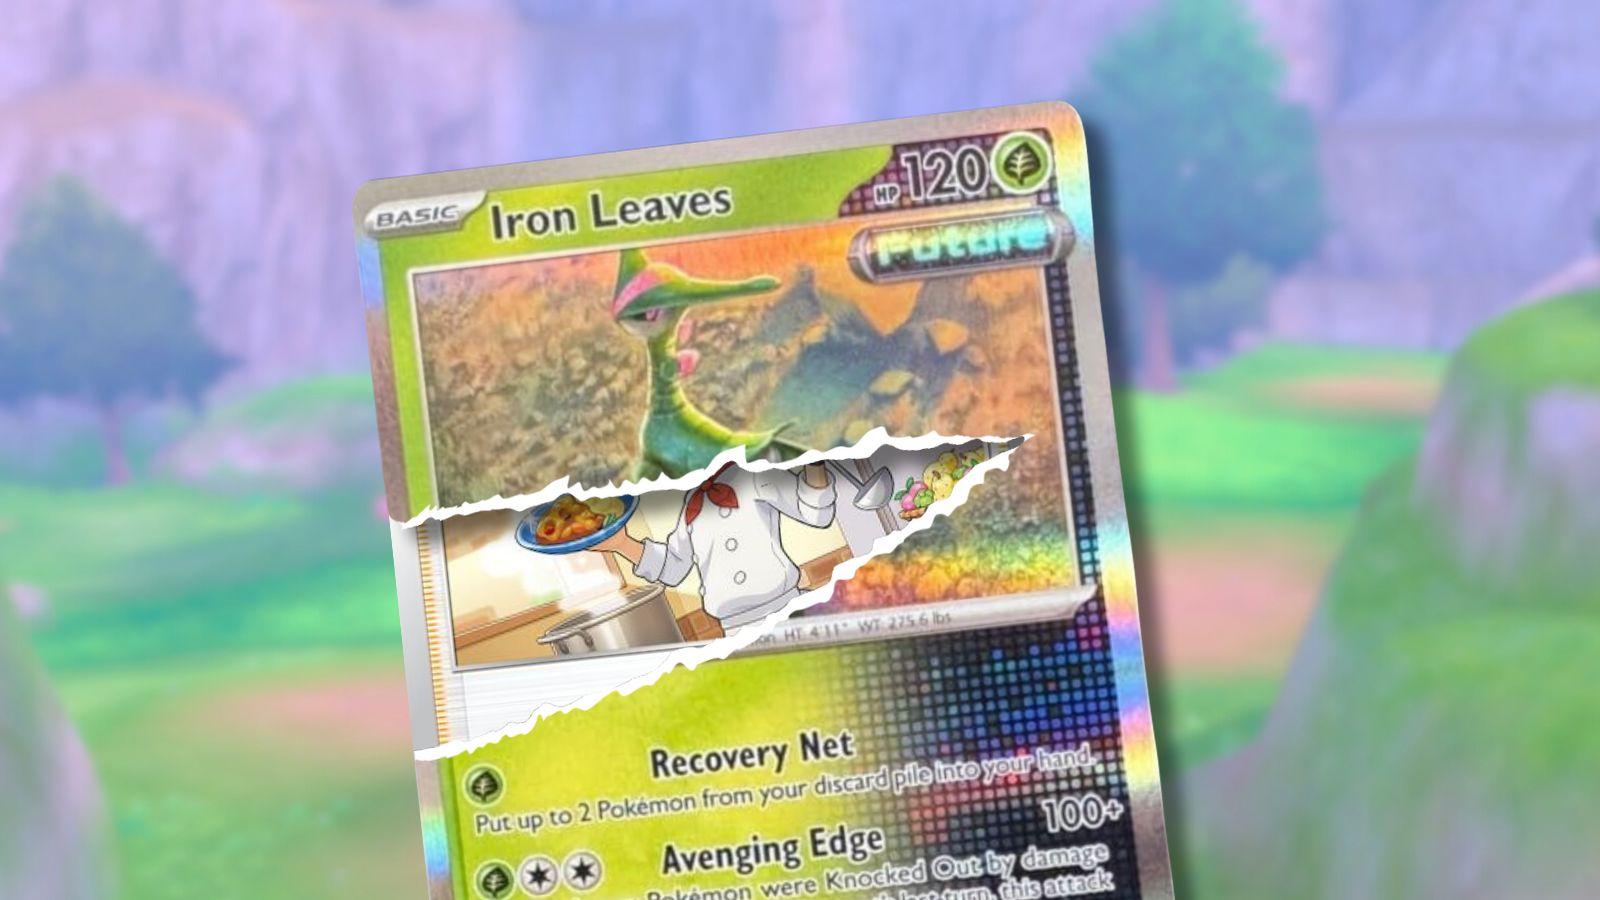 Iron Leaves Pokemon card with rip in the middle and video game background.